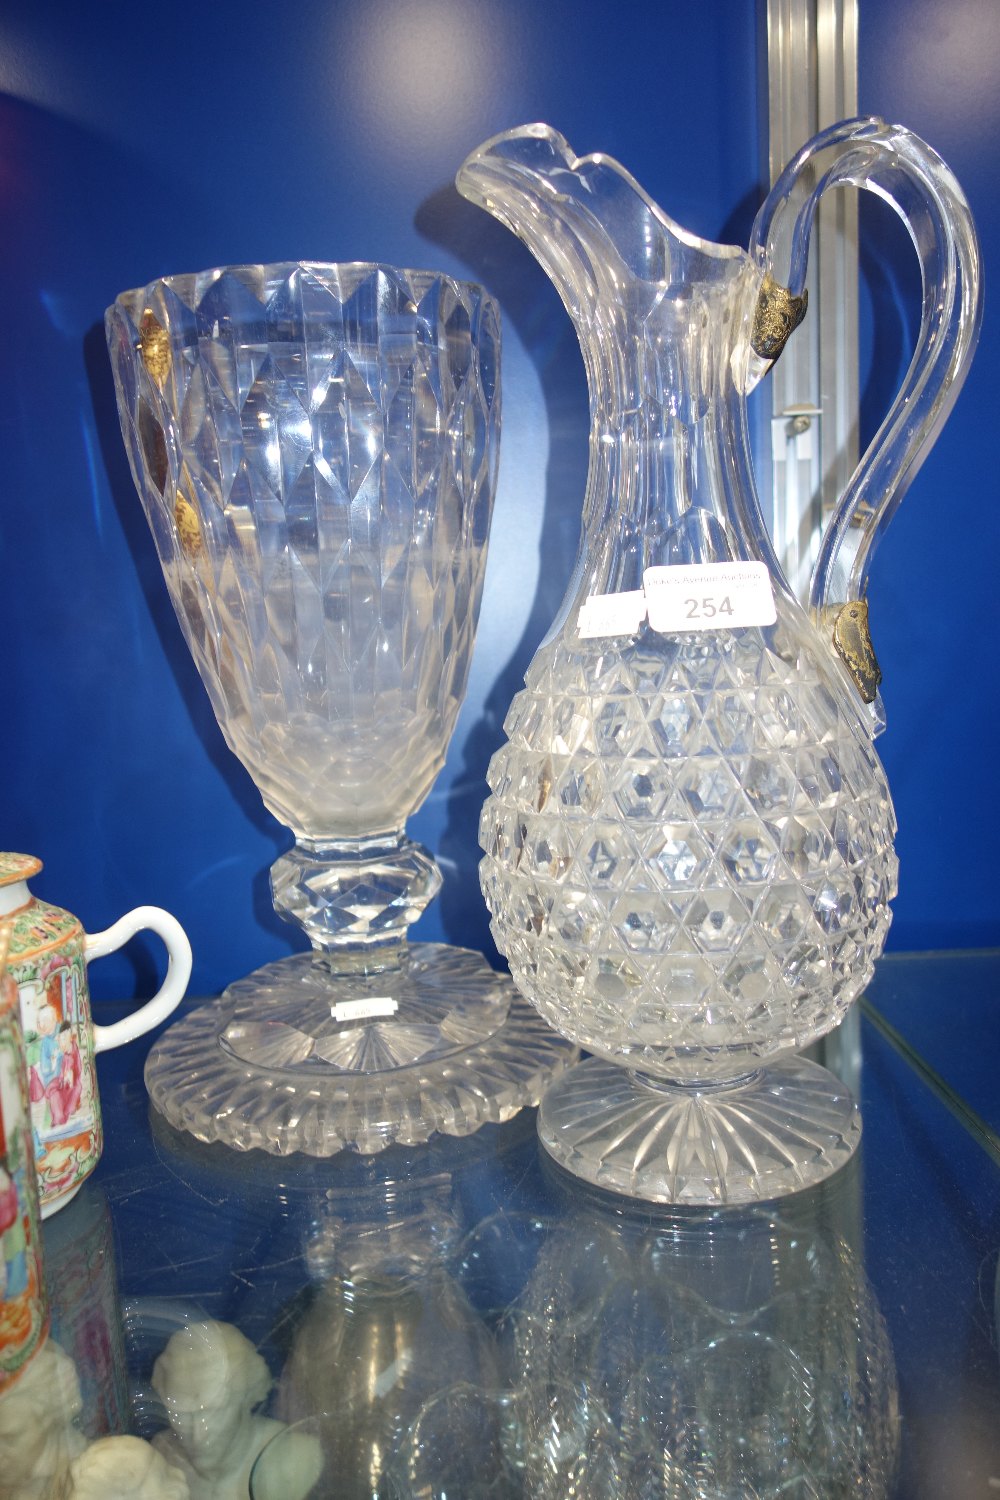 A 19TH CENTURY CUT GLASS JUG with gilt metal repair mounts to the handle and a similar vase